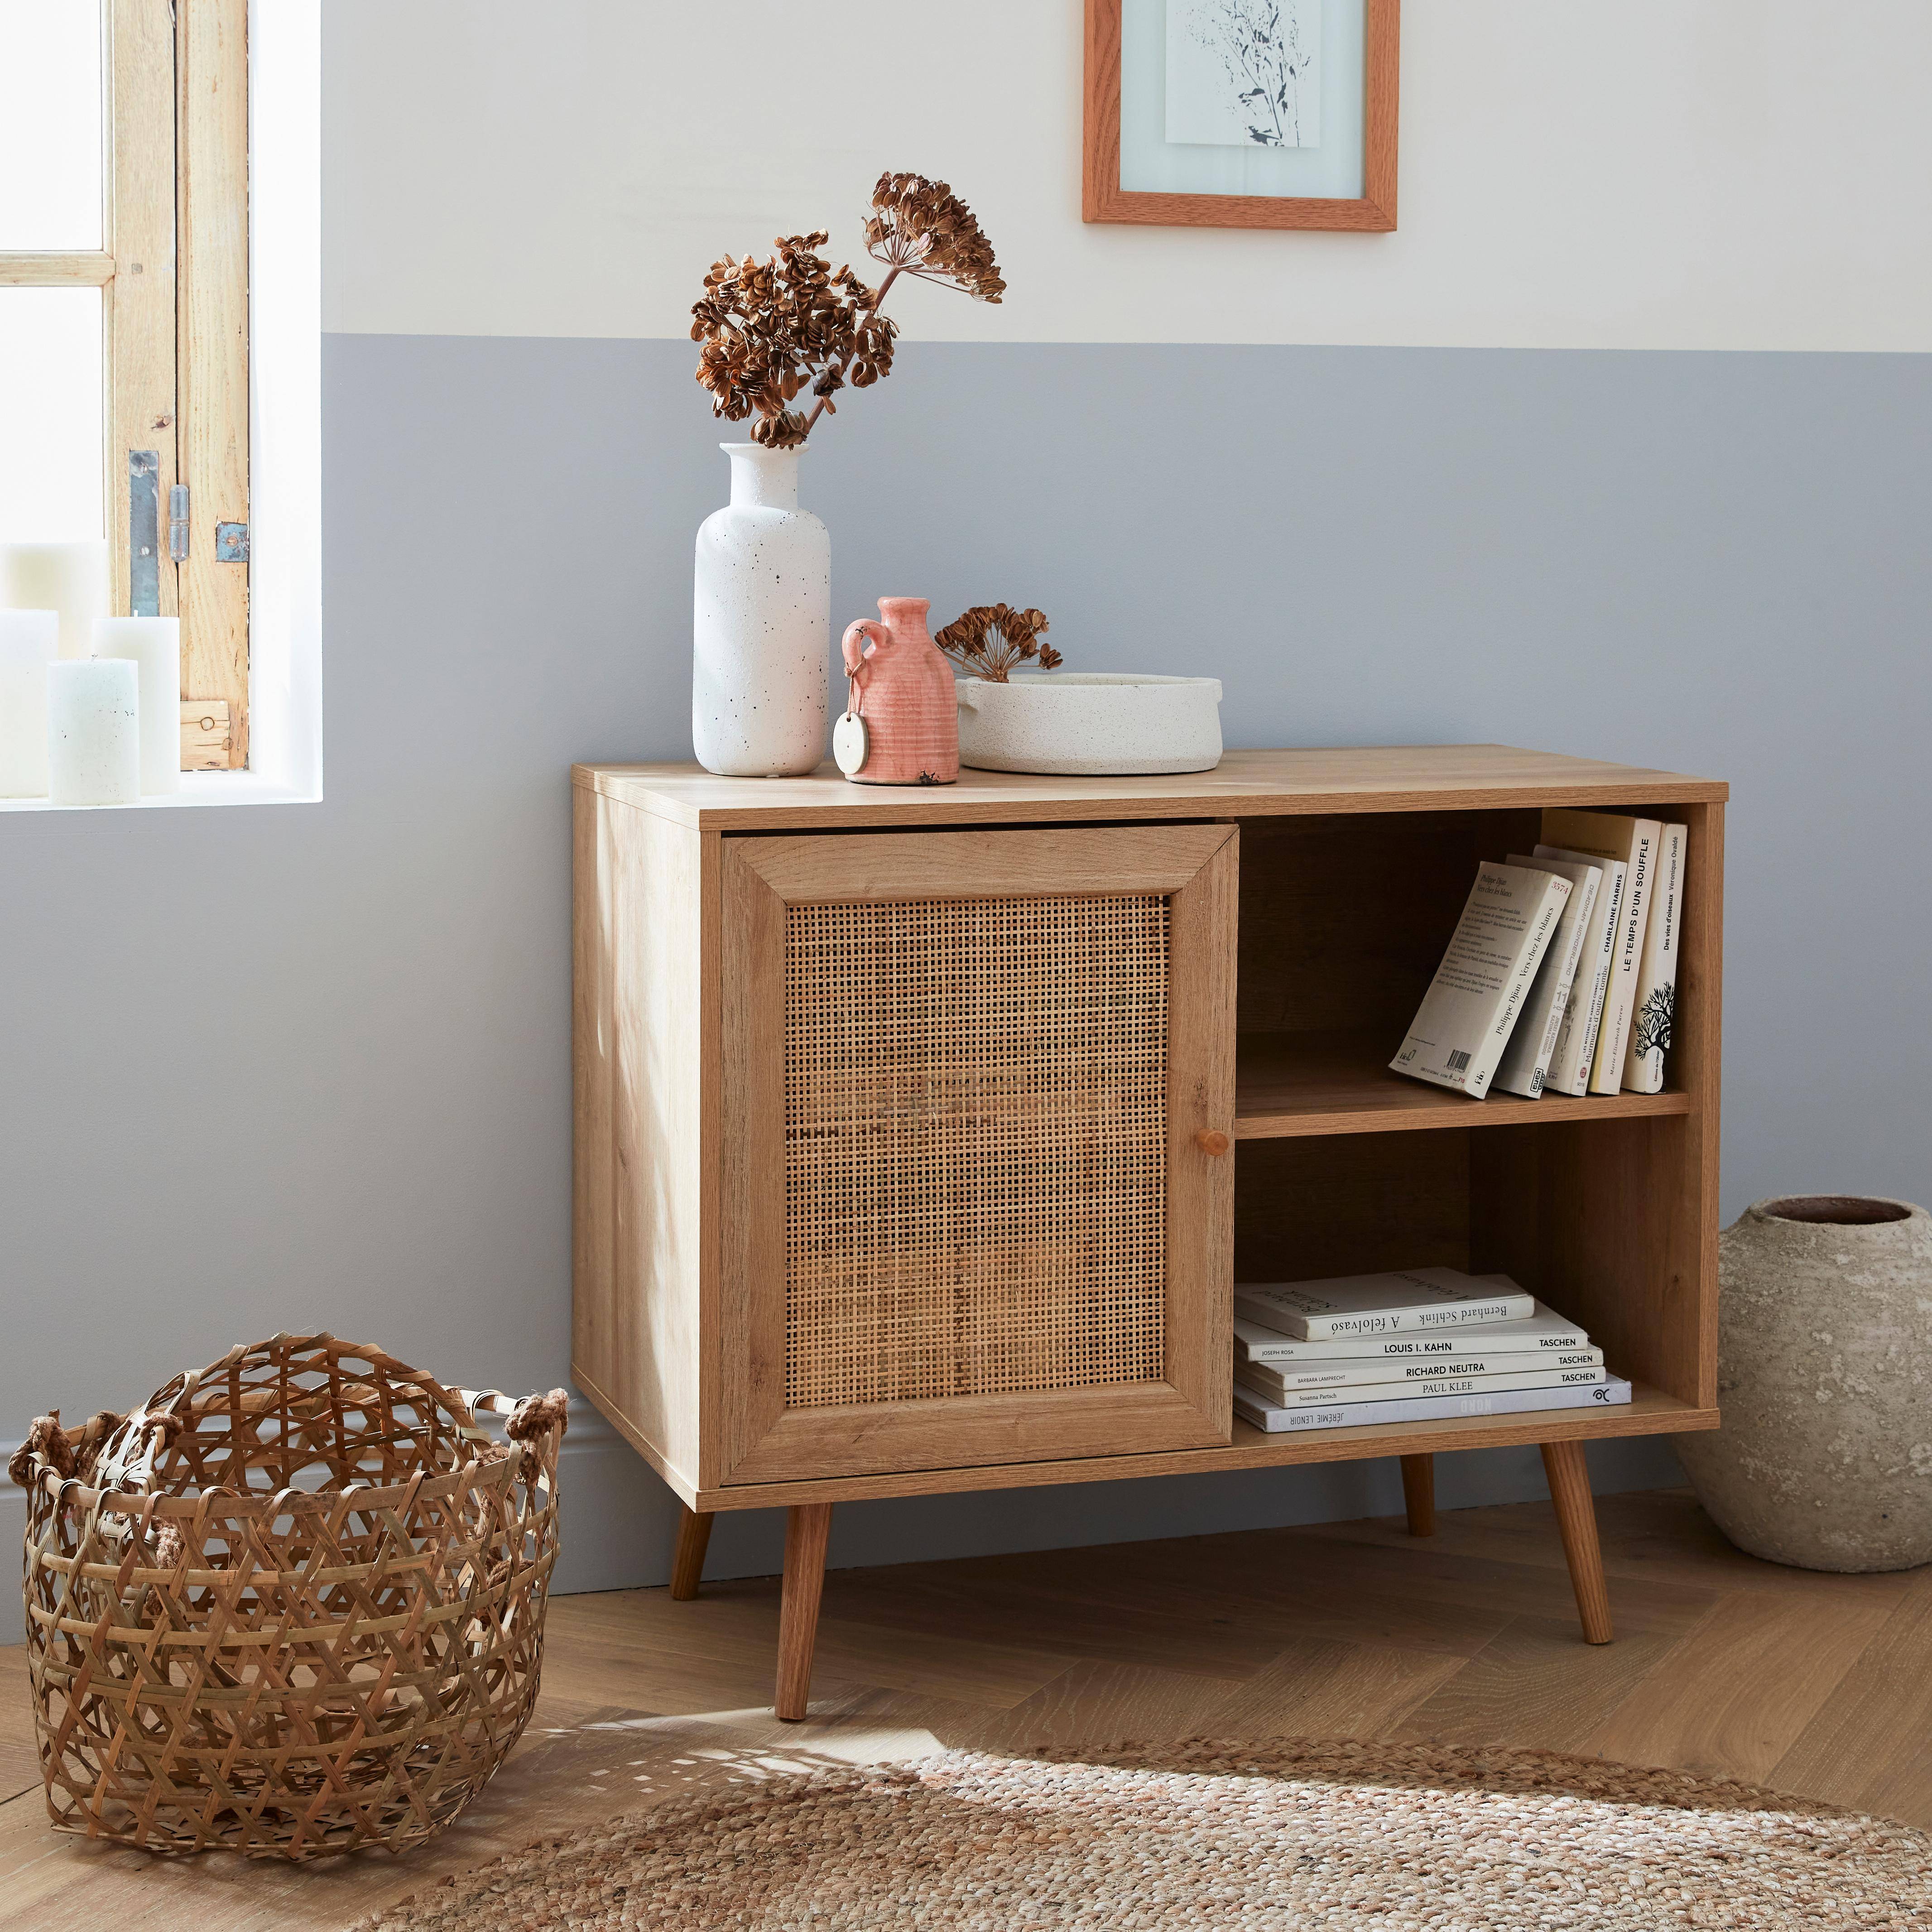 Wooden and cane rattan detail storage cabinet with 2 shelves, 1 cupboard, Scandi-style legs, 80x39x65.8cm - Boheme - Natural wood colour,sweeek,Photo1